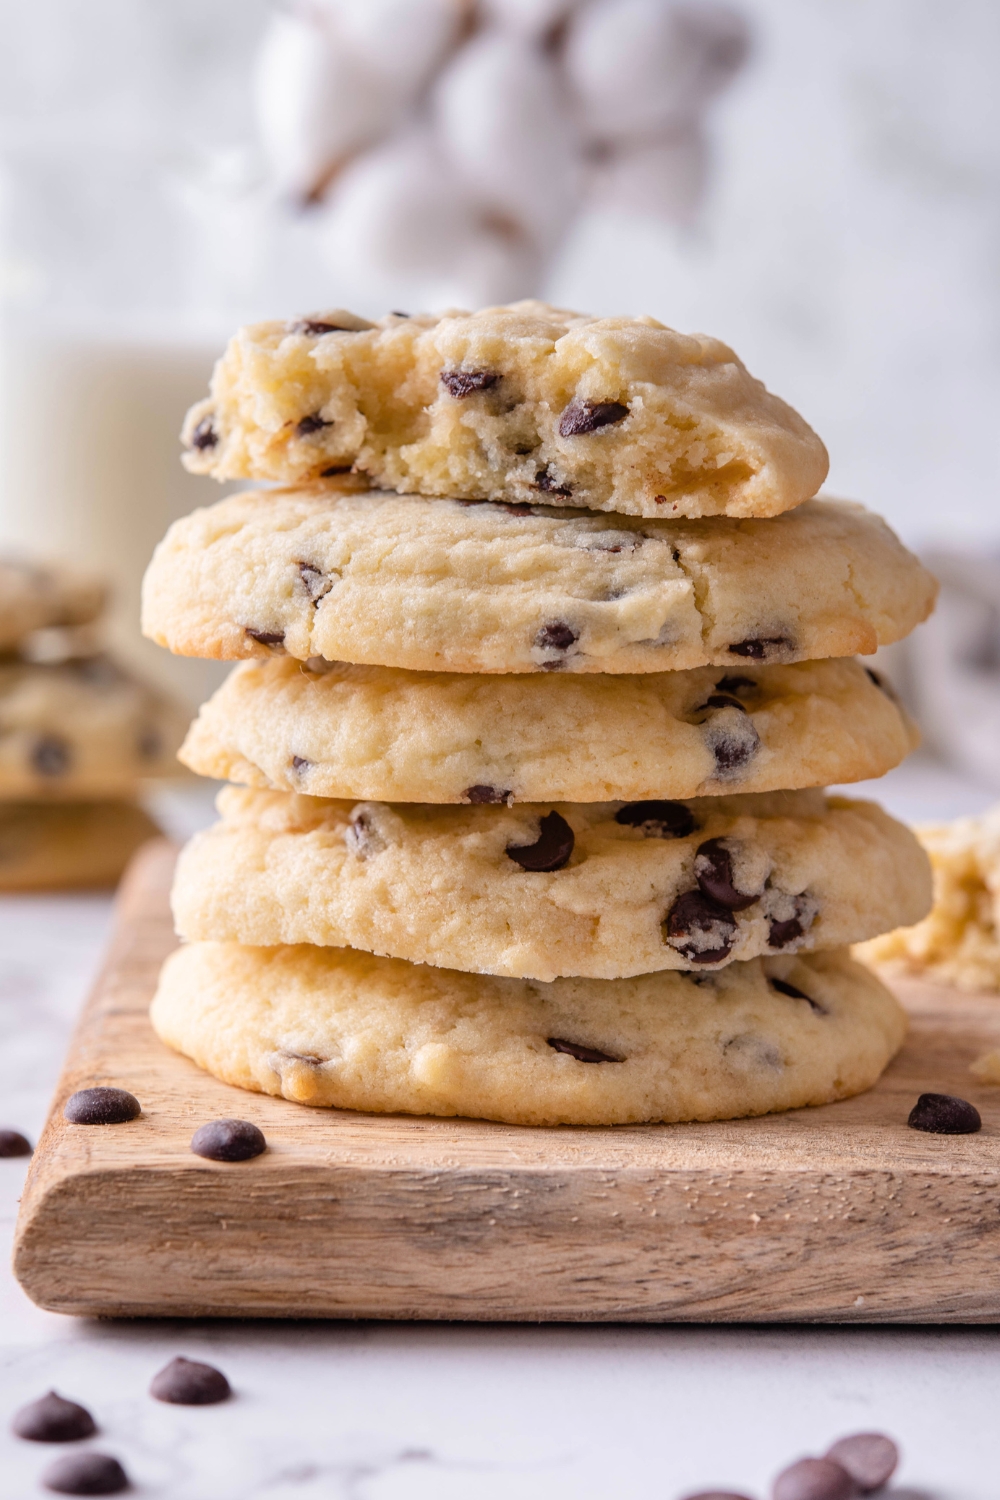 A stack of six chocolate chip cookies on a wooden board. The top cookie has a bite out of the front of it.